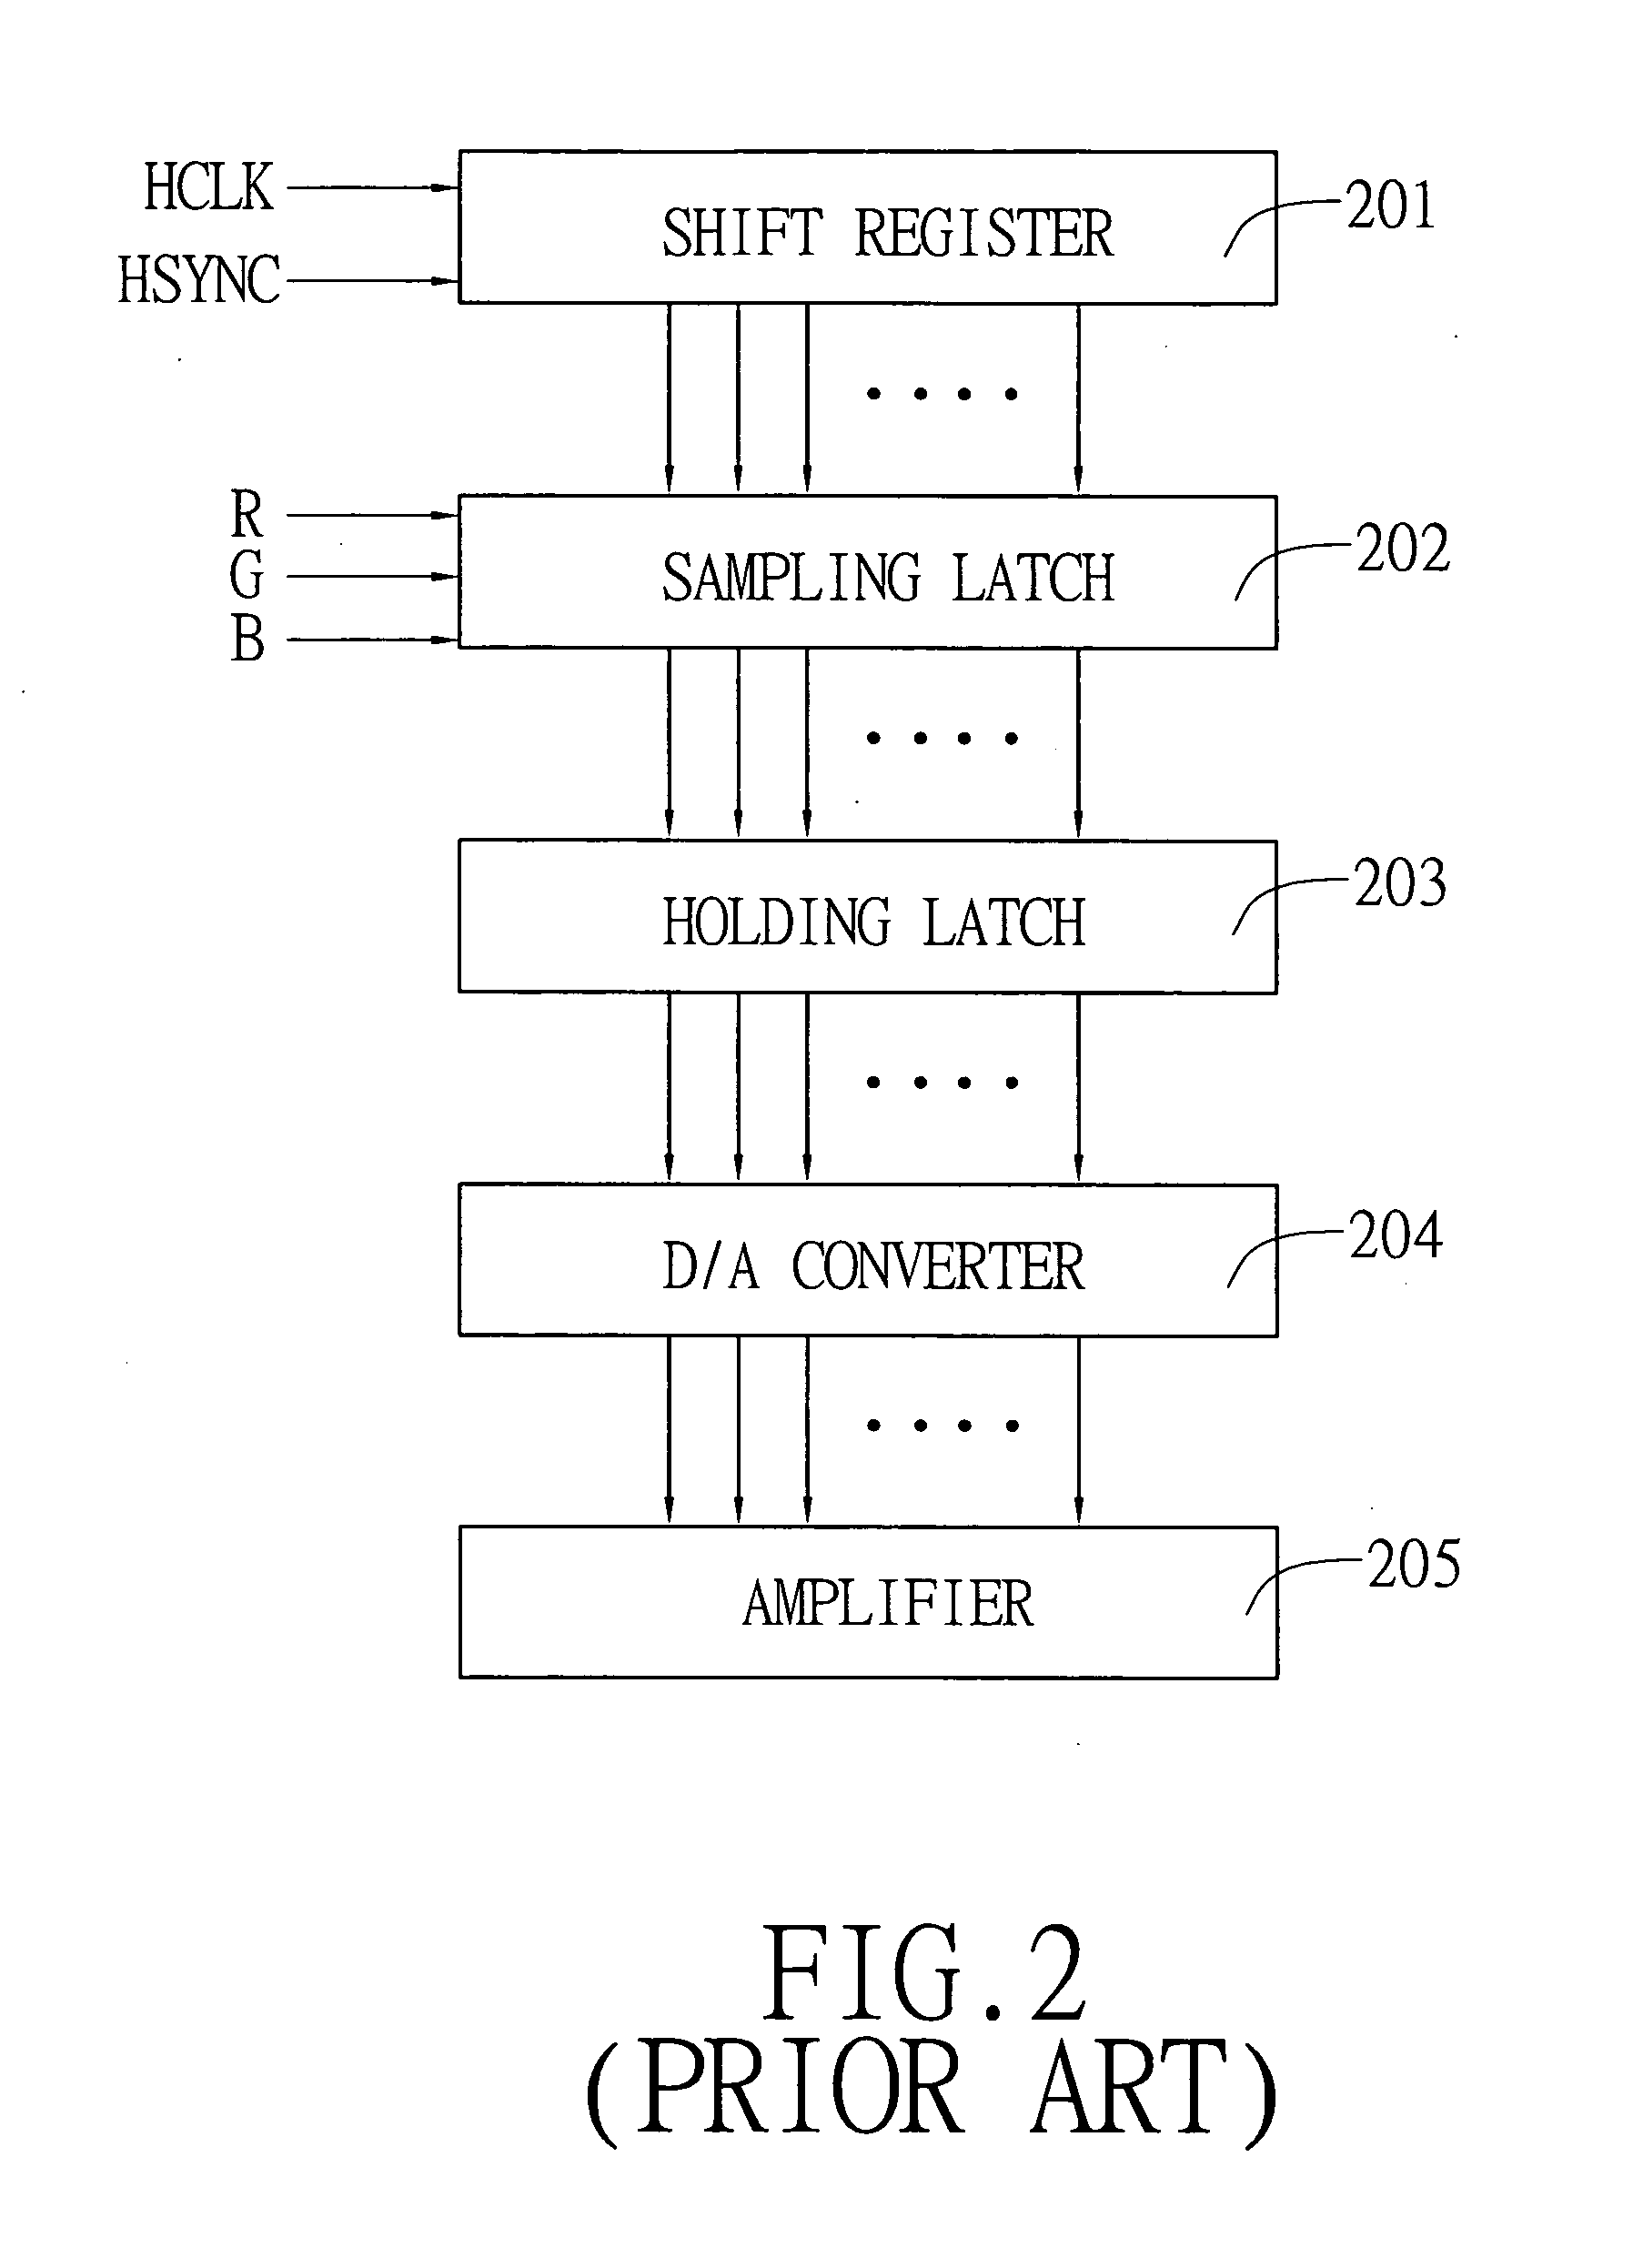 Circuits and methods for synchronizing multi-phase converter with display signal of LCD device